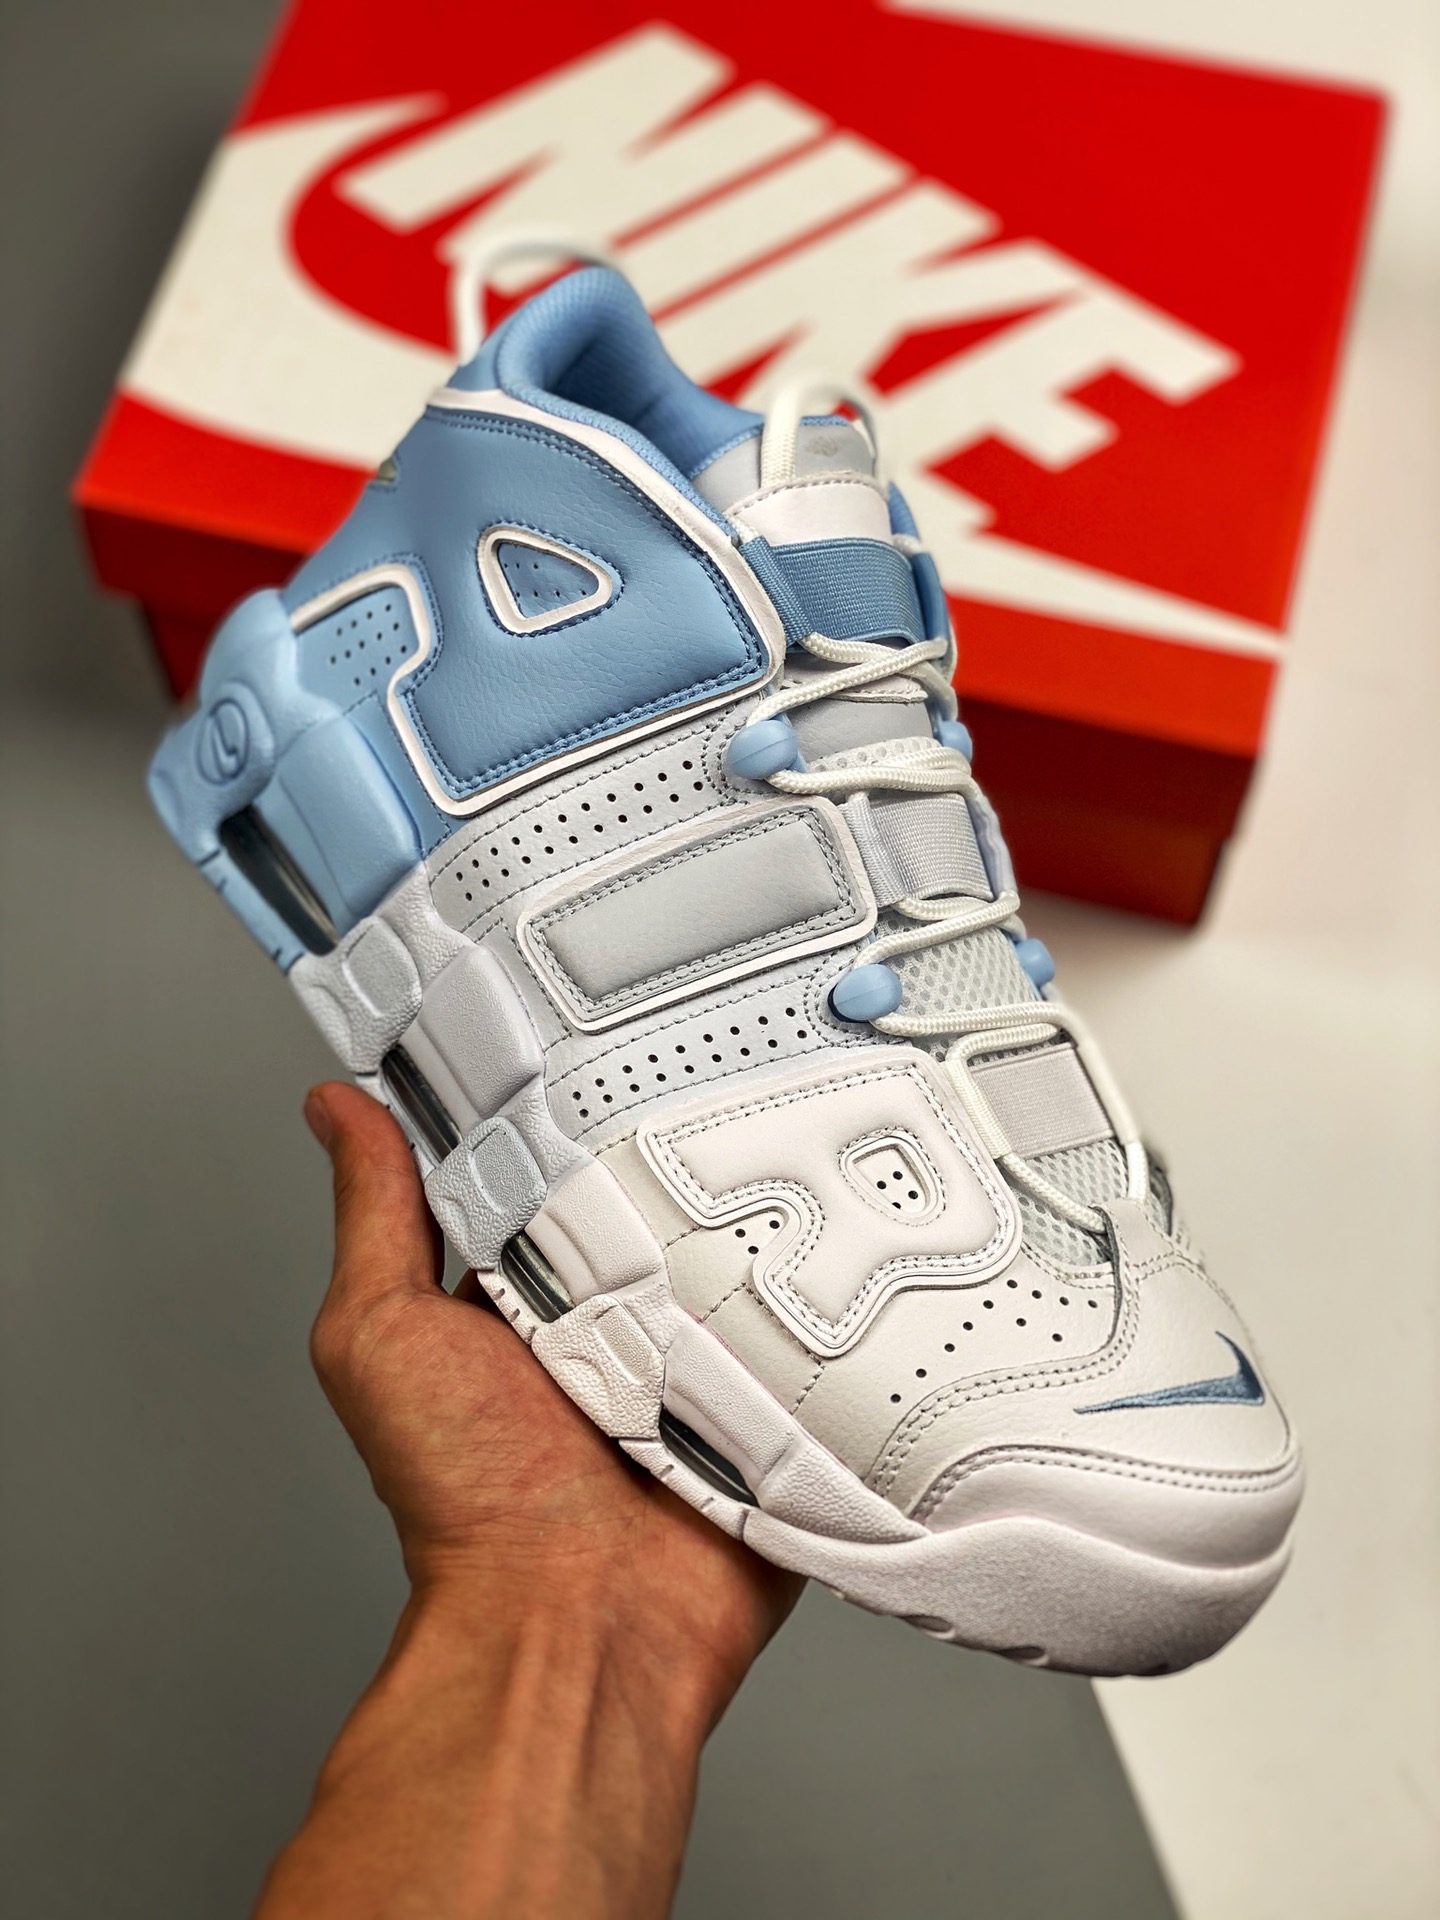 Nike Air More Uptempo "Sky Blue" Psychic Blue/Grey-White-Multi-Color Shoes